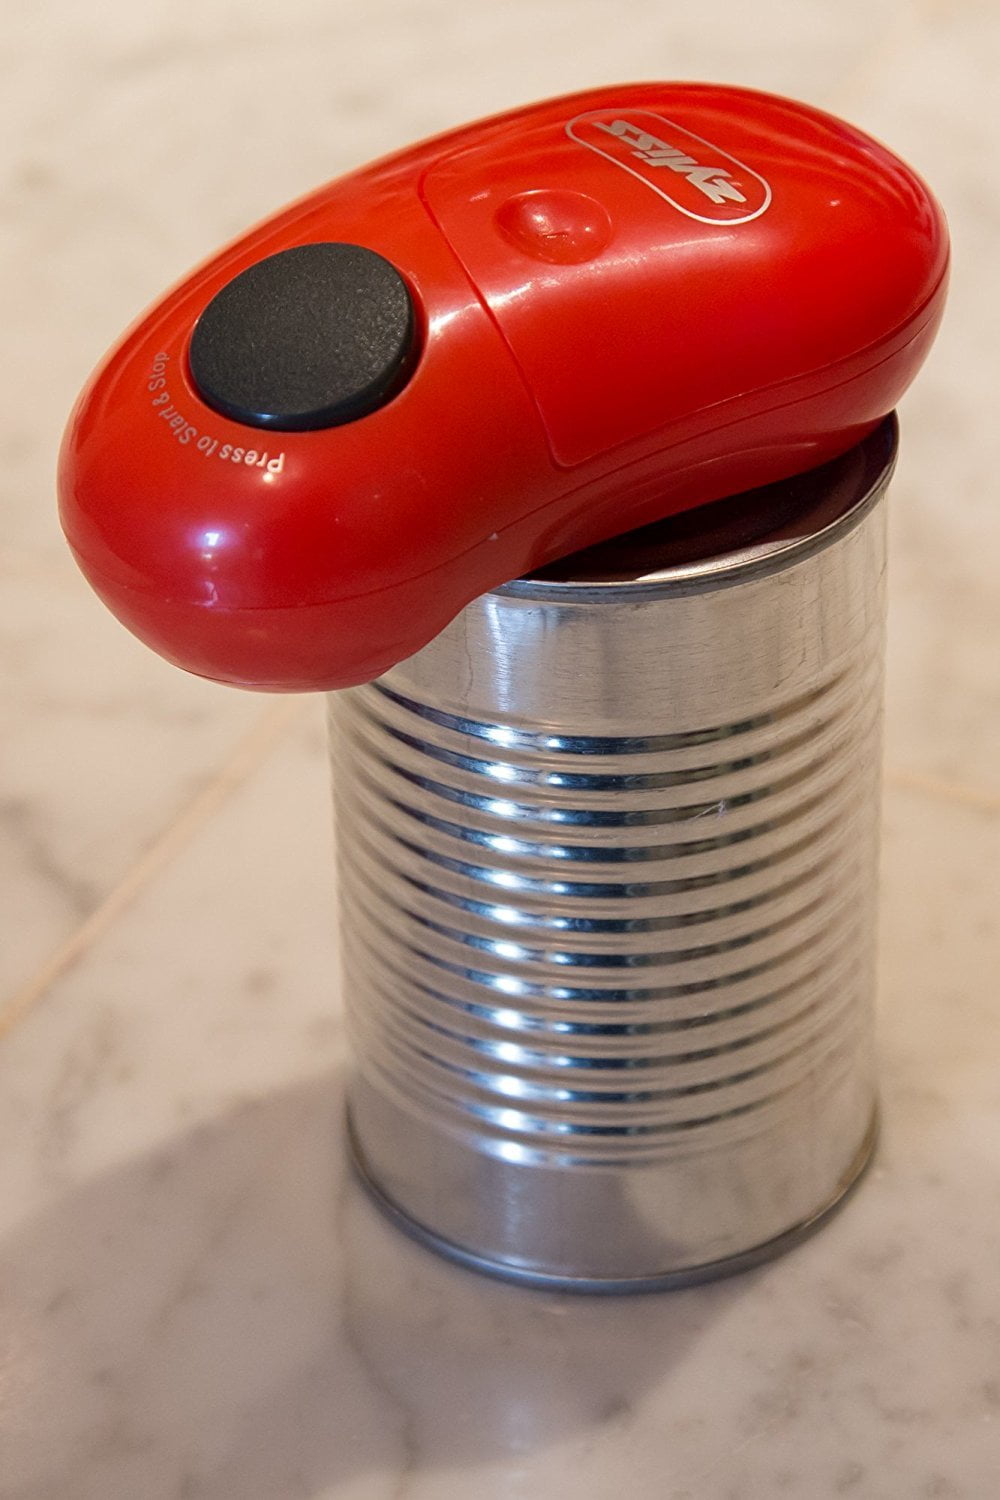 Zyliss EasiCan Electric Can Opener